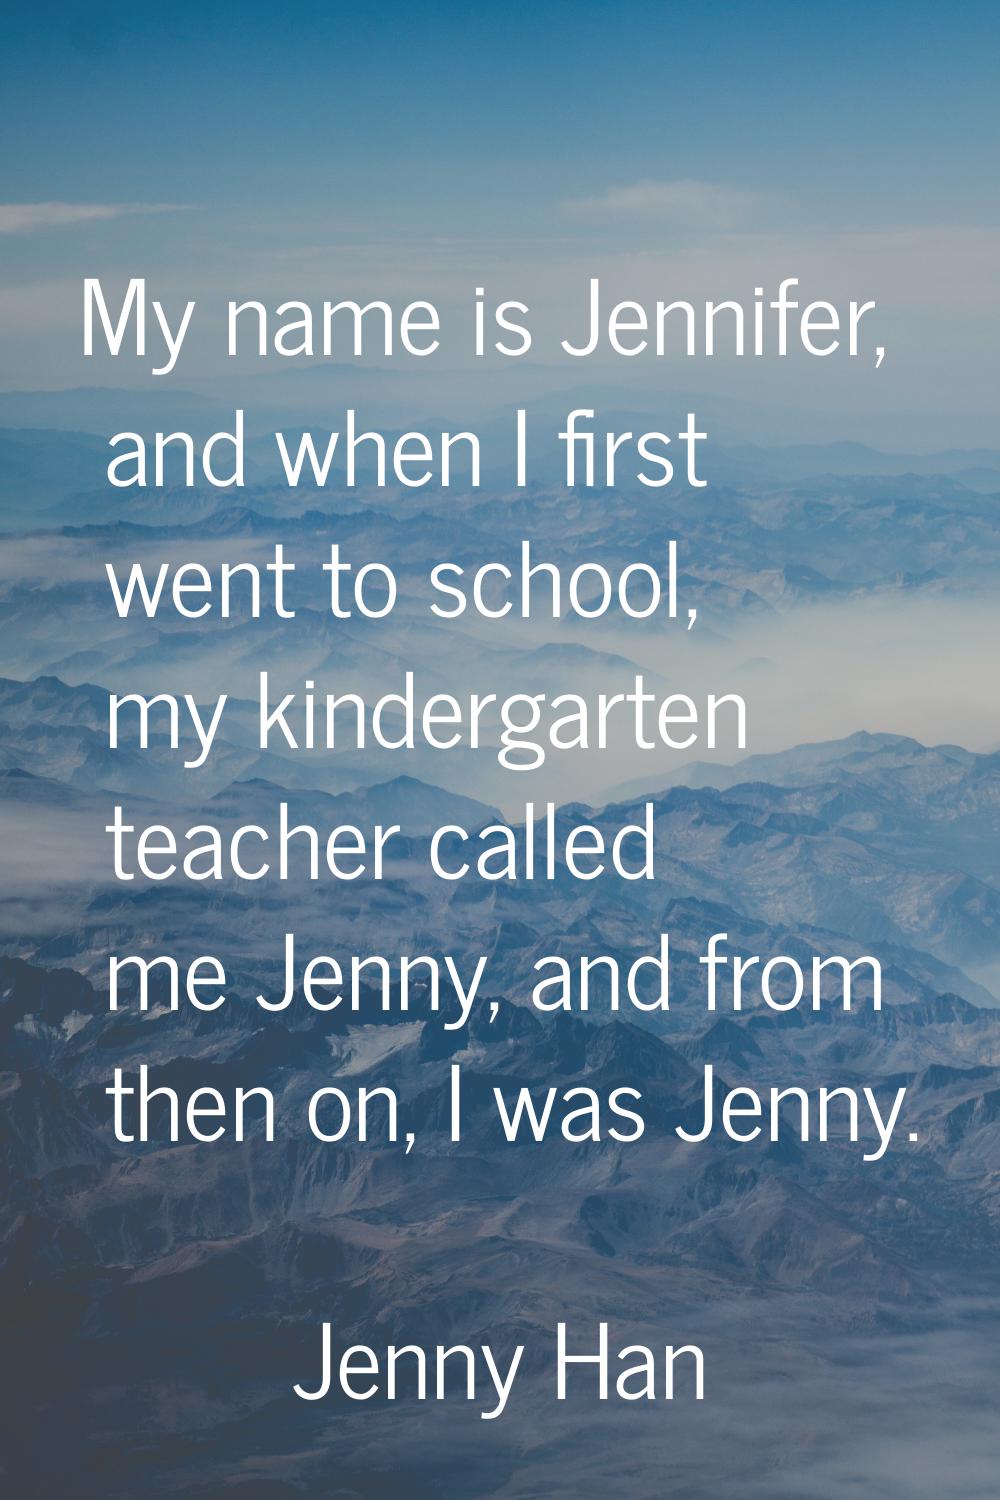 My name is Jennifer, and when I first went to school, my kindergarten teacher called me Jenny, and 